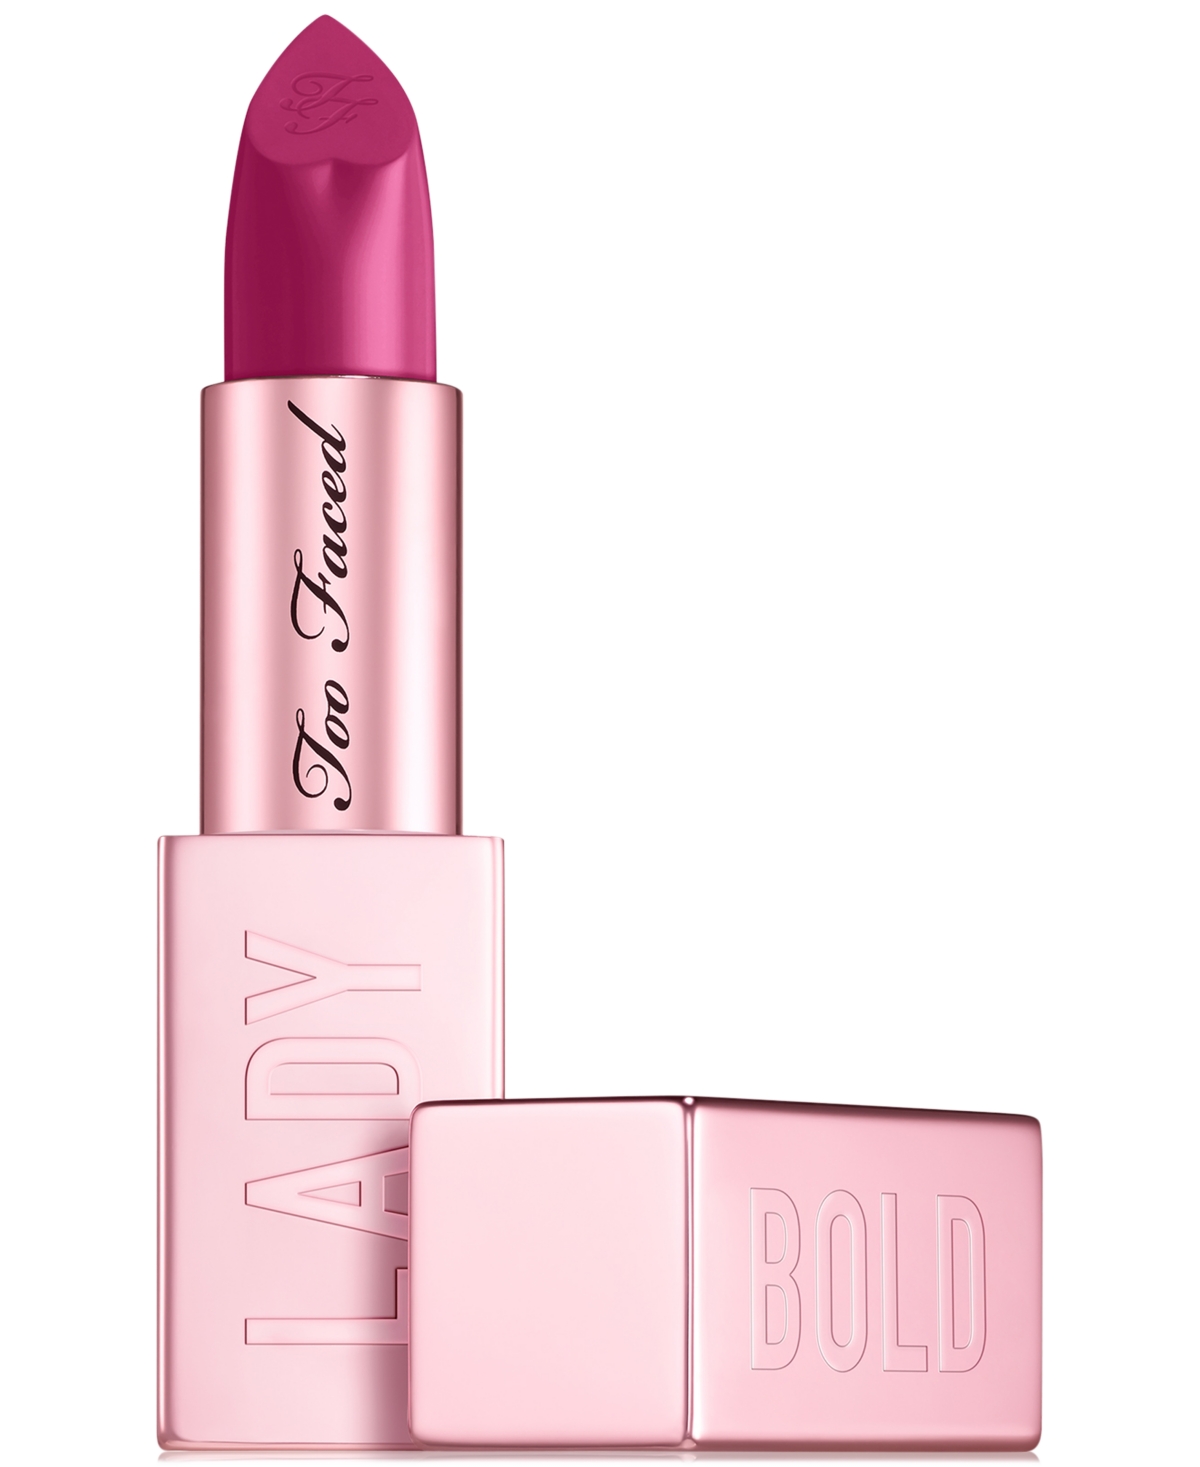 Too Faced Lady Bold Rich & Creamy High-impact Color Lipstick In Main Character